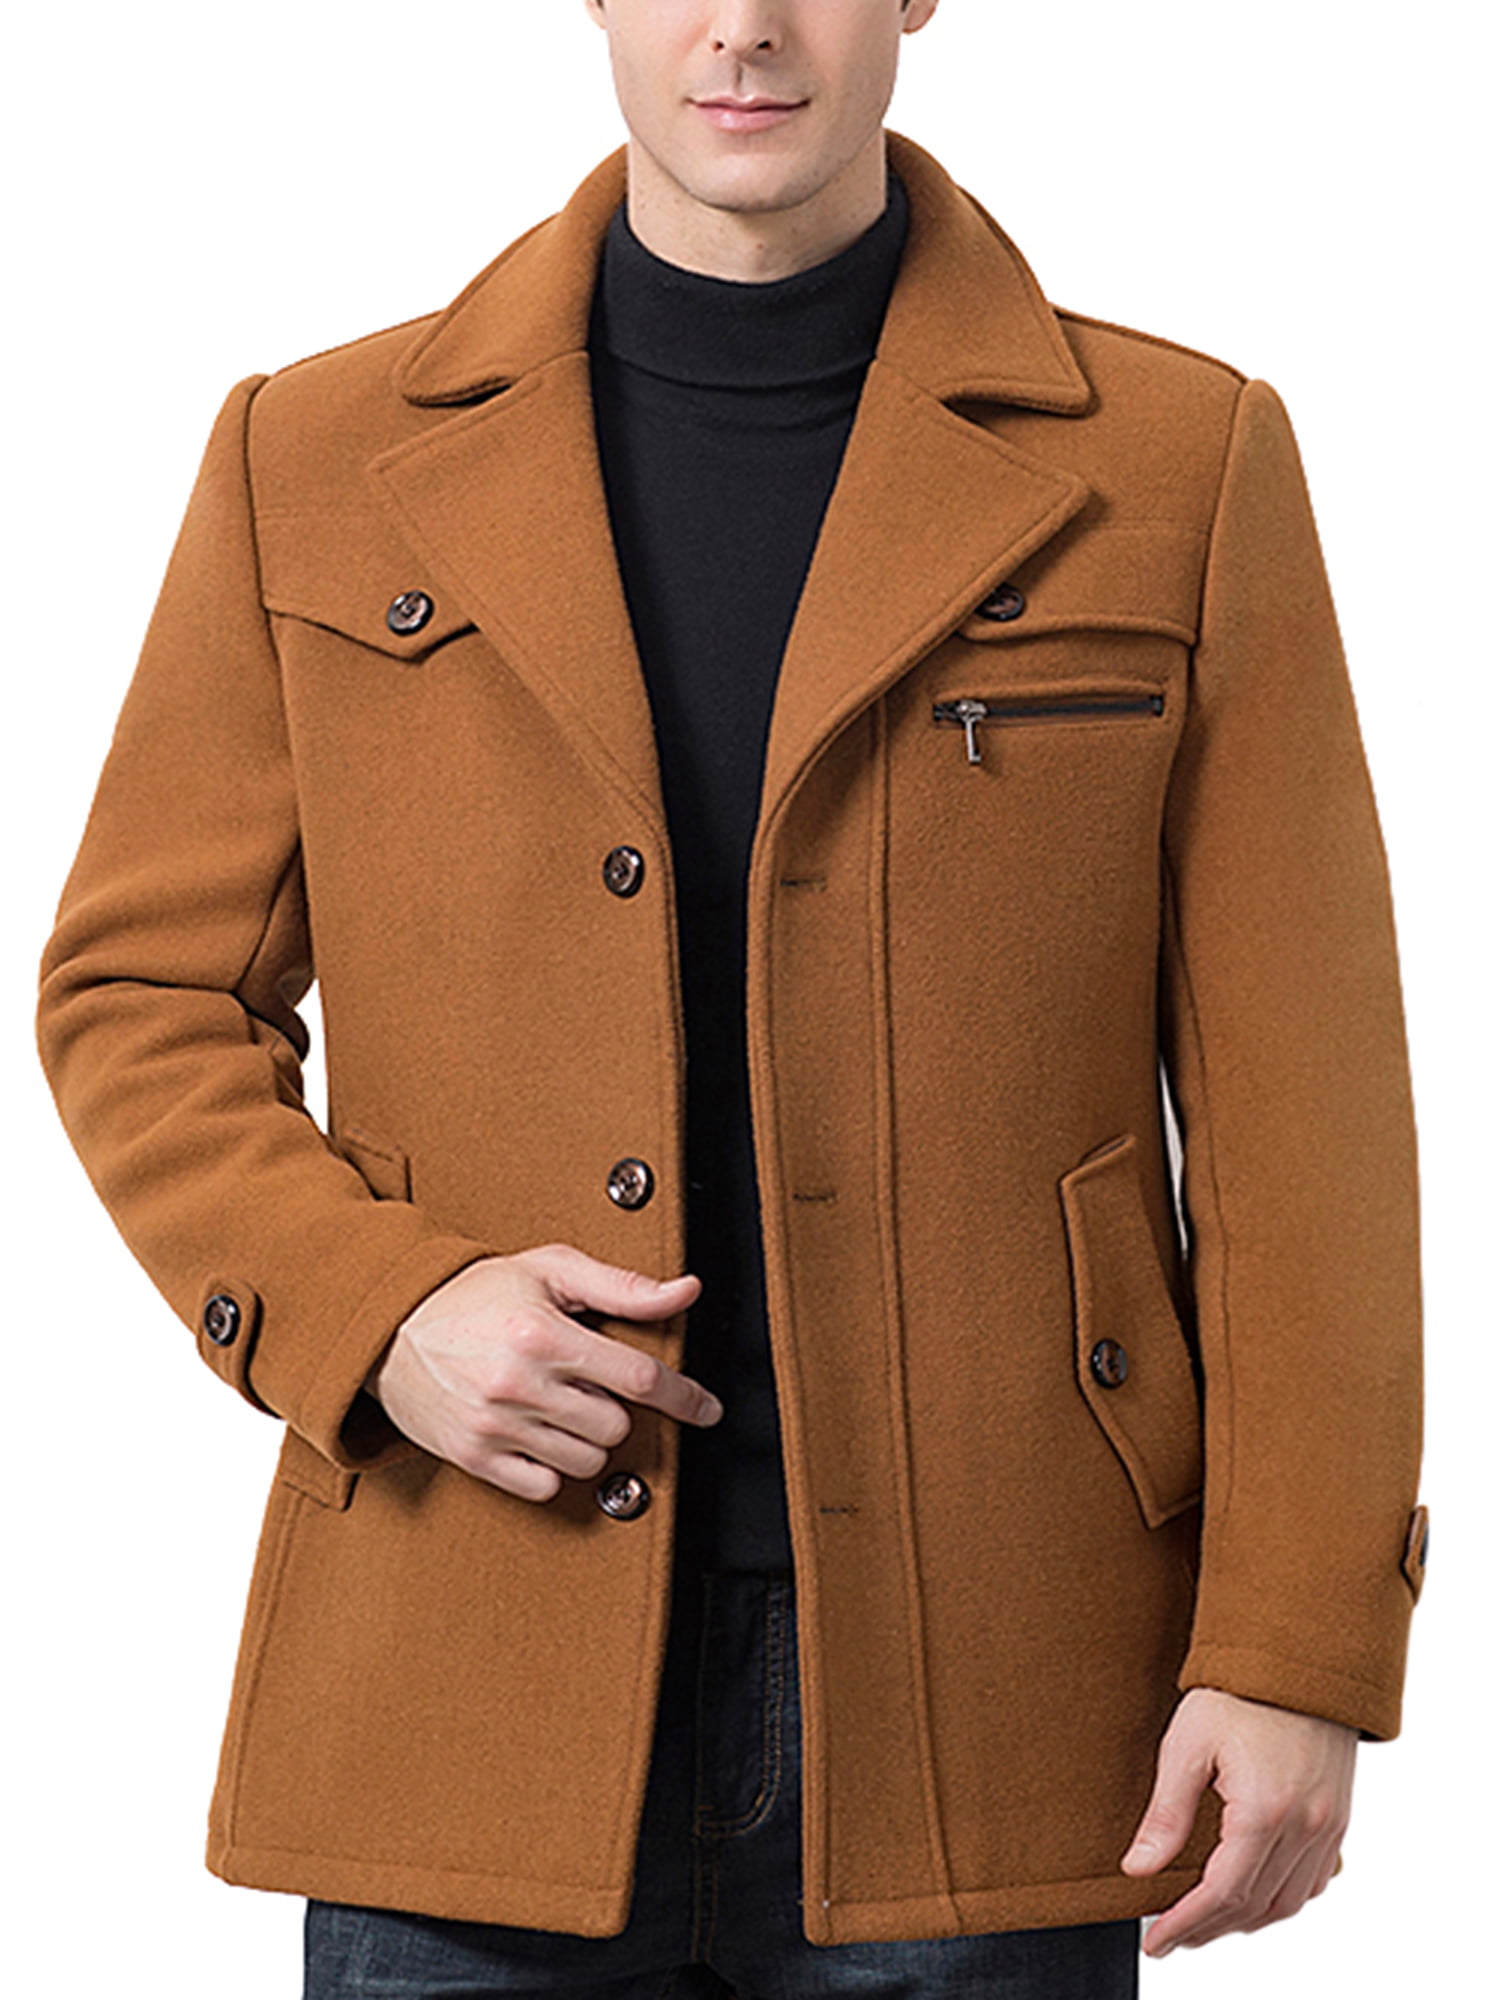 MirrliyMen Single-Breasted Stand Collar Pure Epaulet Trench Coat Jacket